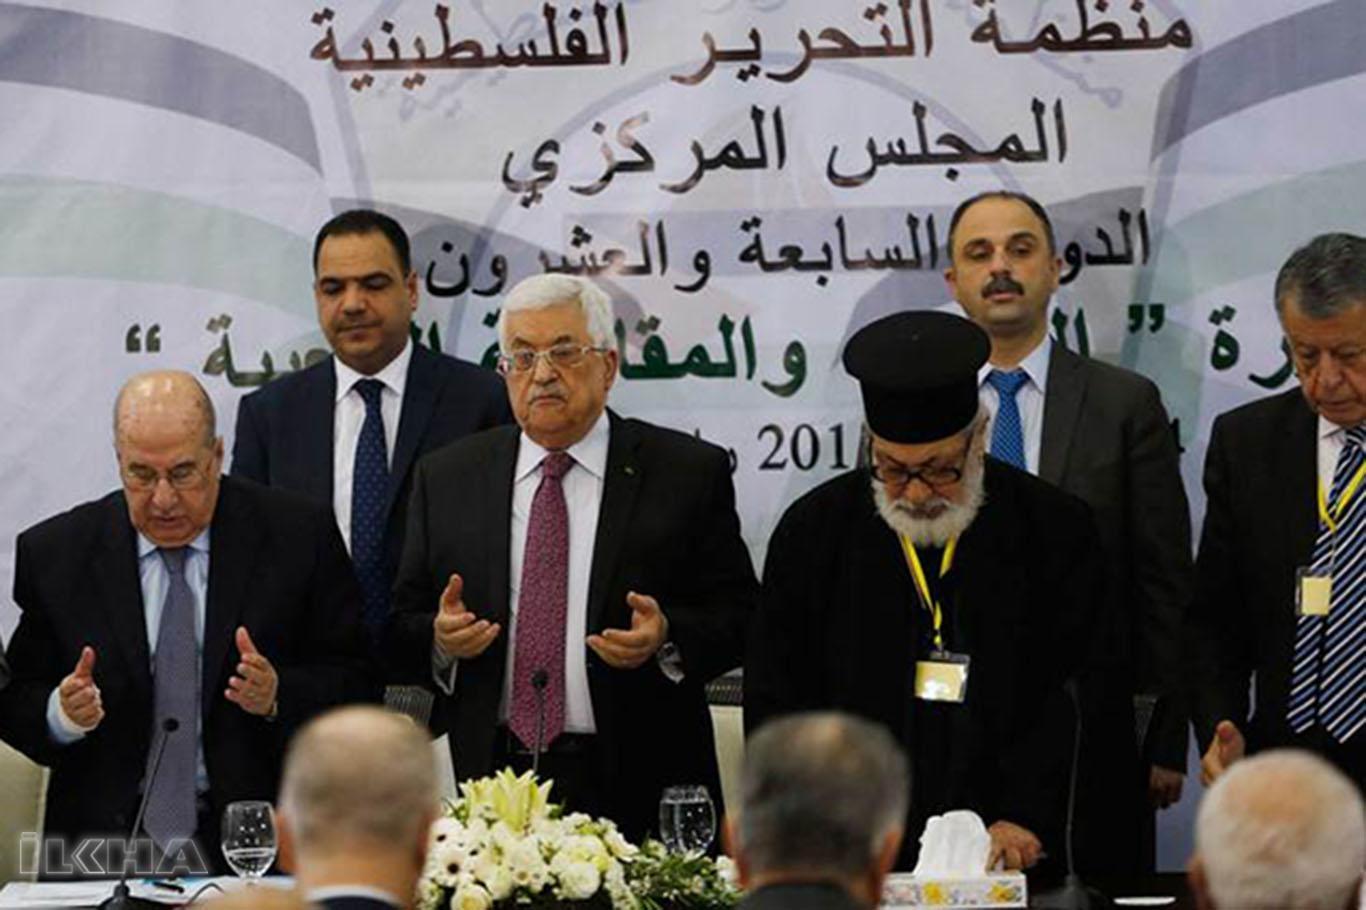 Top Palestinian body calls to suspend all agreement with zionists